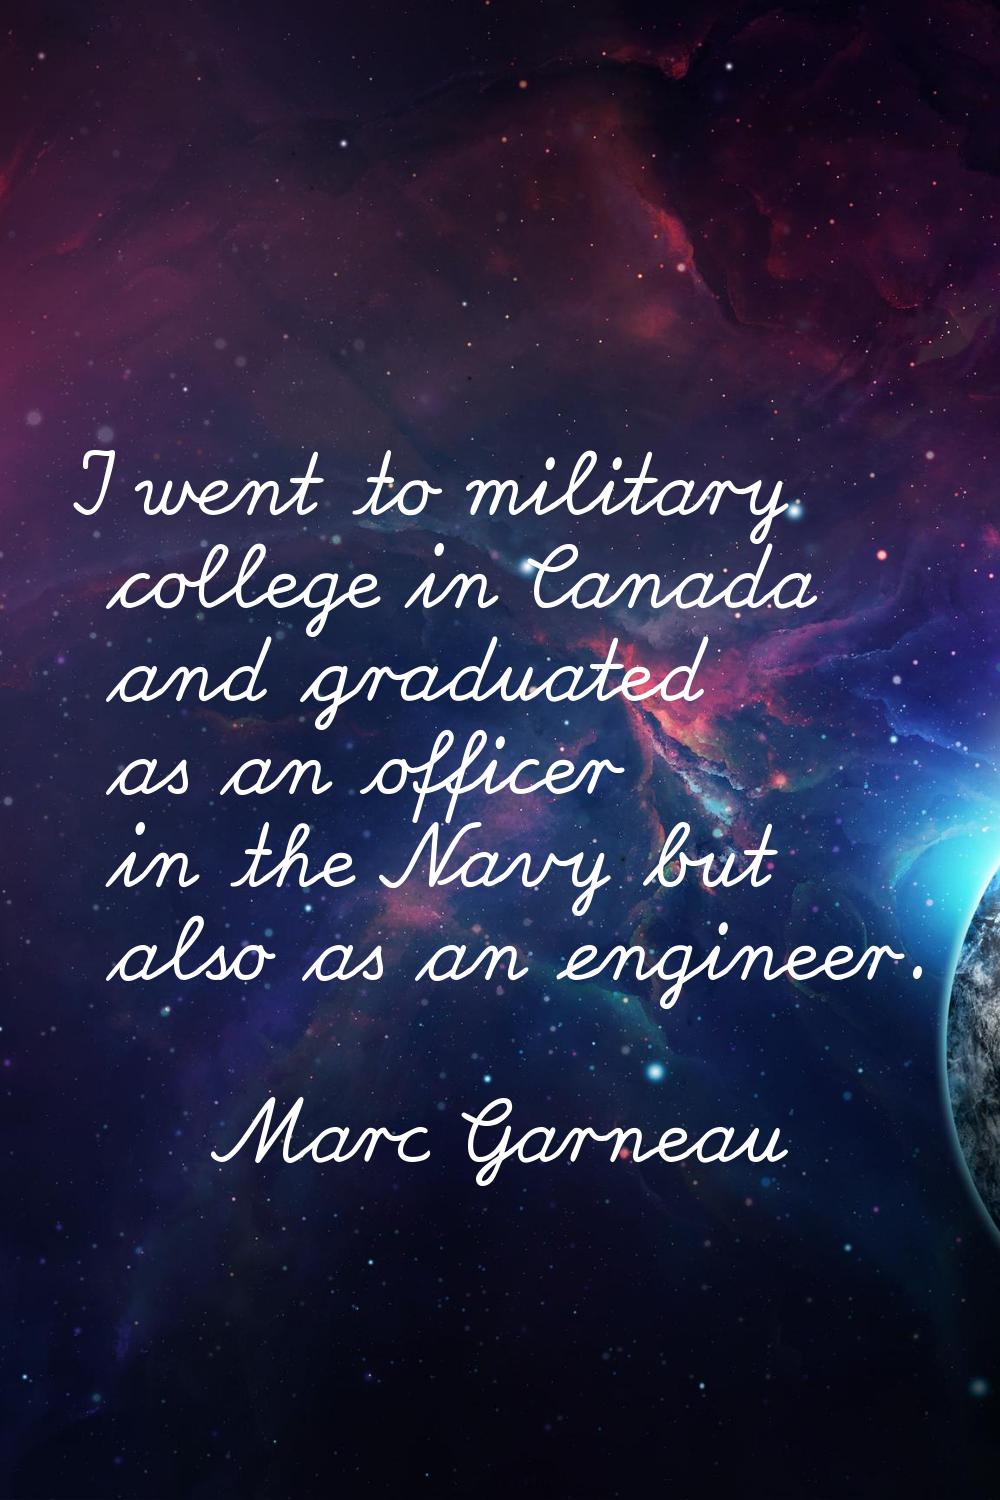 I went to military college in Canada and graduated as an officer in the Navy but also as an enginee